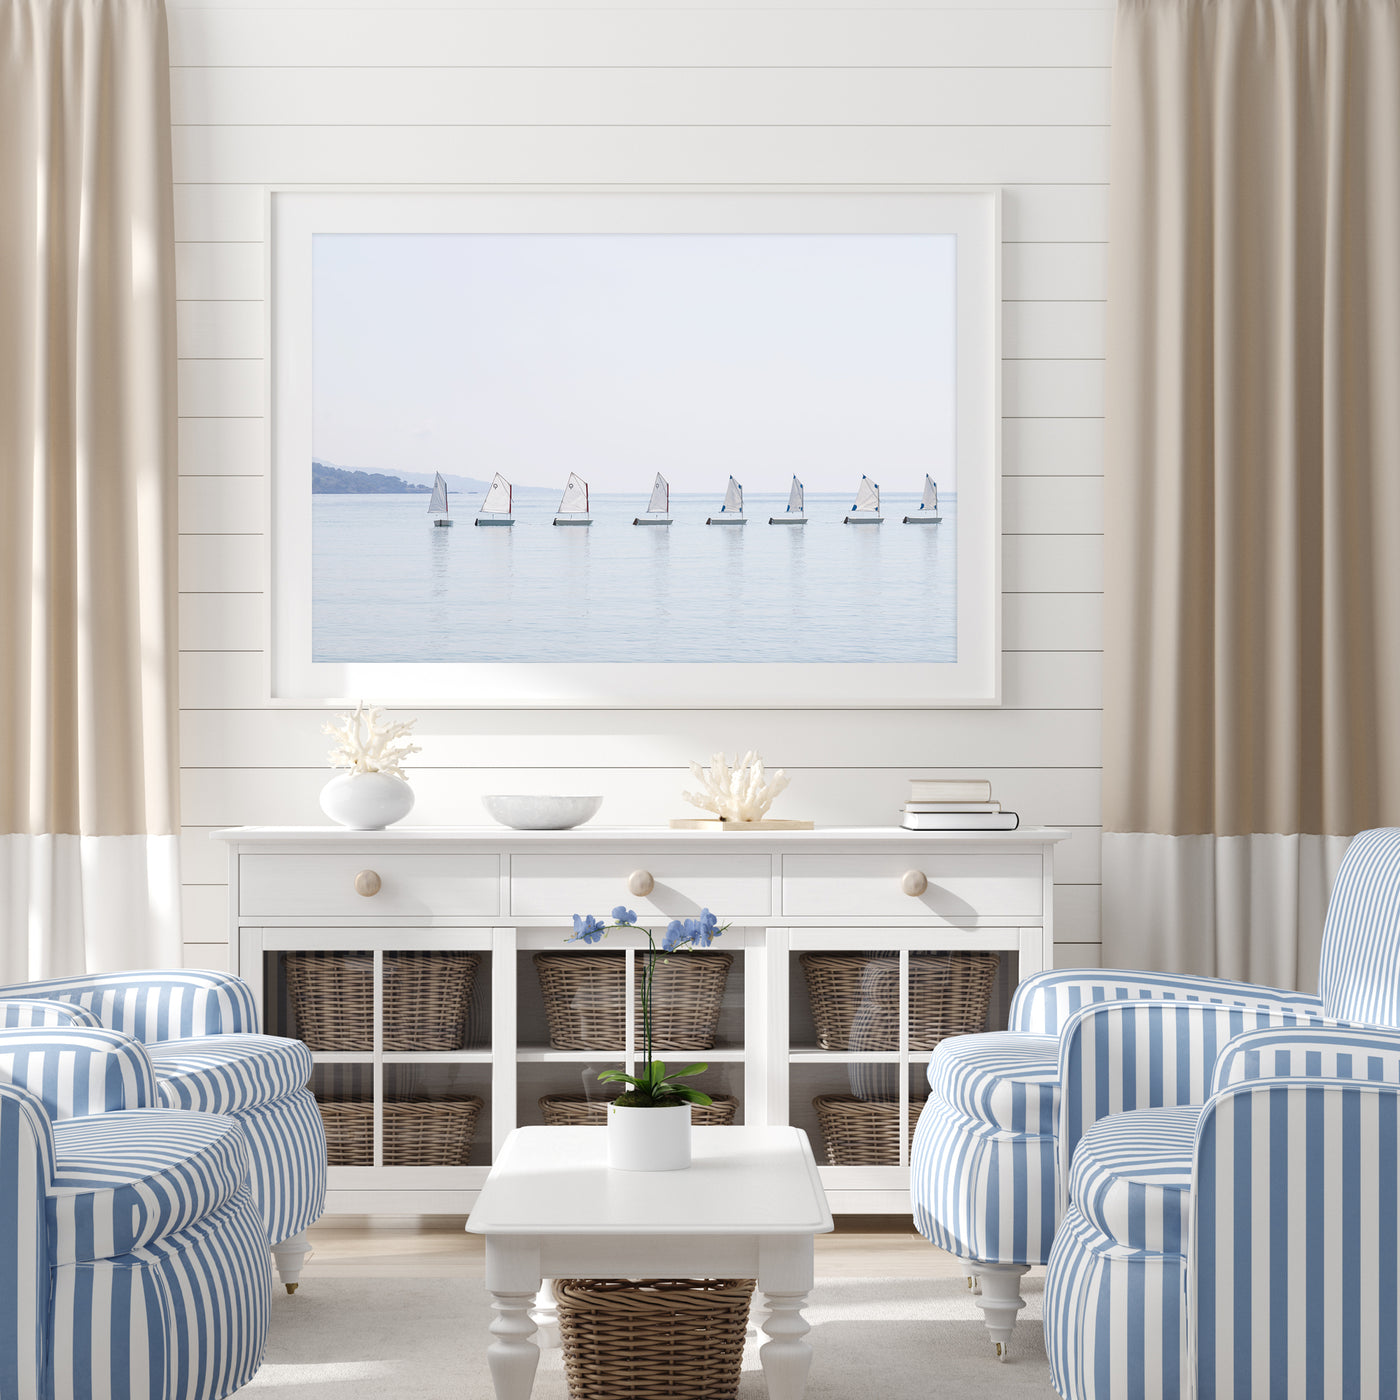 The Little Sailboats – Large fine art print by Cattie Coyle Photography